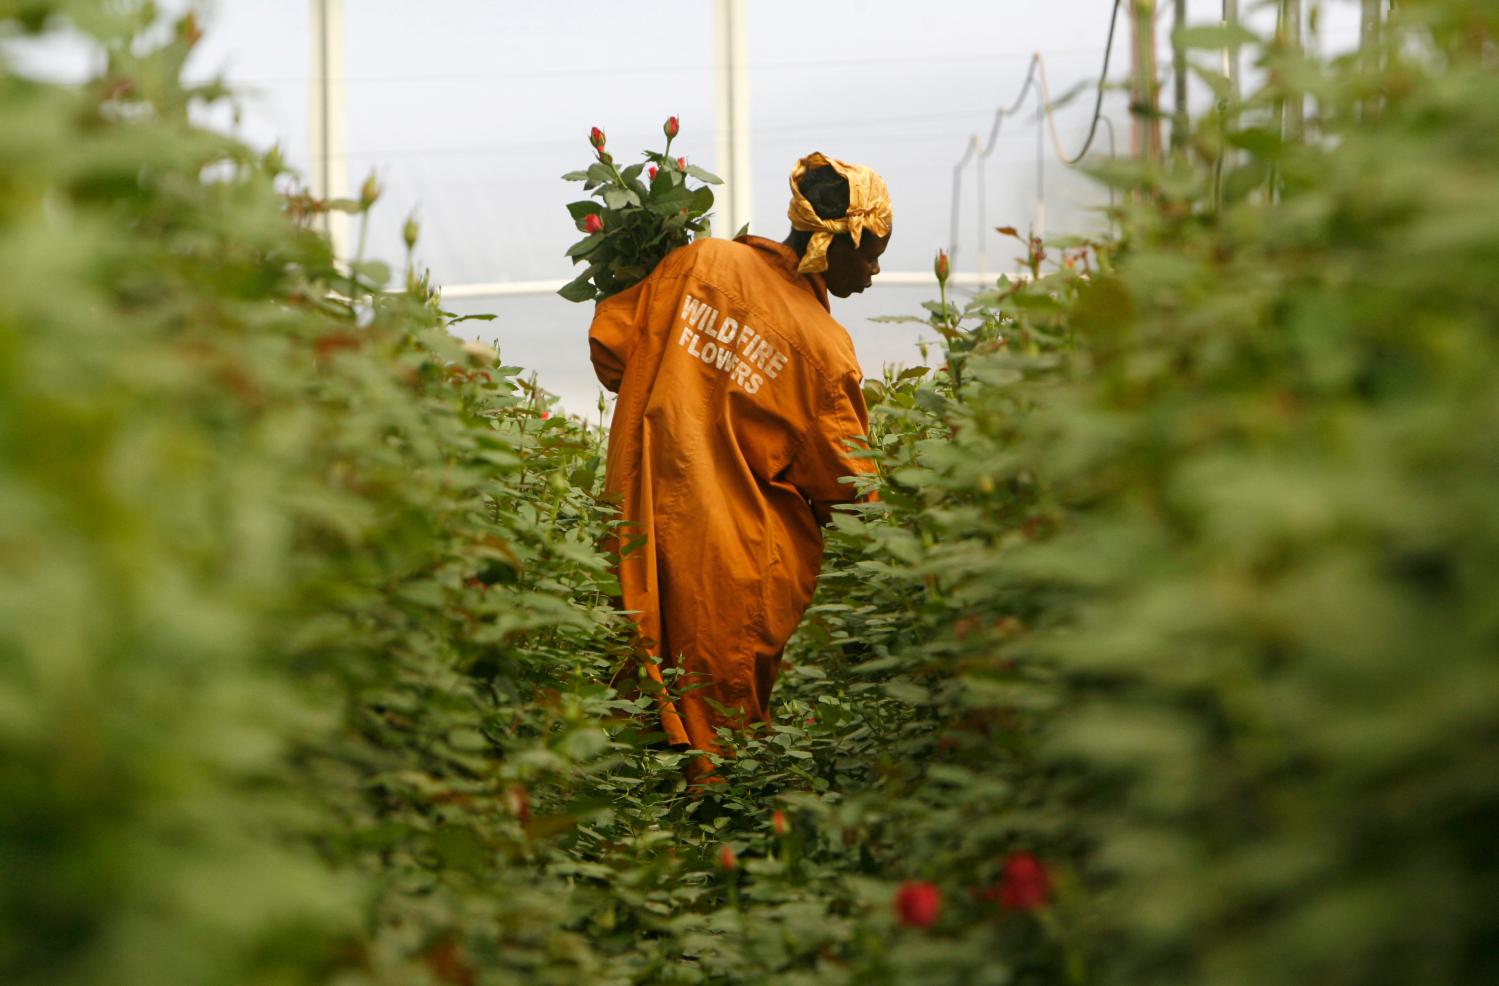 A worker collects roses at a flower farm in Naivasha, January 30, 2008. The Ethiopian flower industry is booming and the country will export up to two million stems a day in the two weeks leading up to Valentine's day. Picture taken January 30, 2008. To match feature ETHIOPIA/FLOWERS      REUTERS/Antony Njuguna   (KENYA)